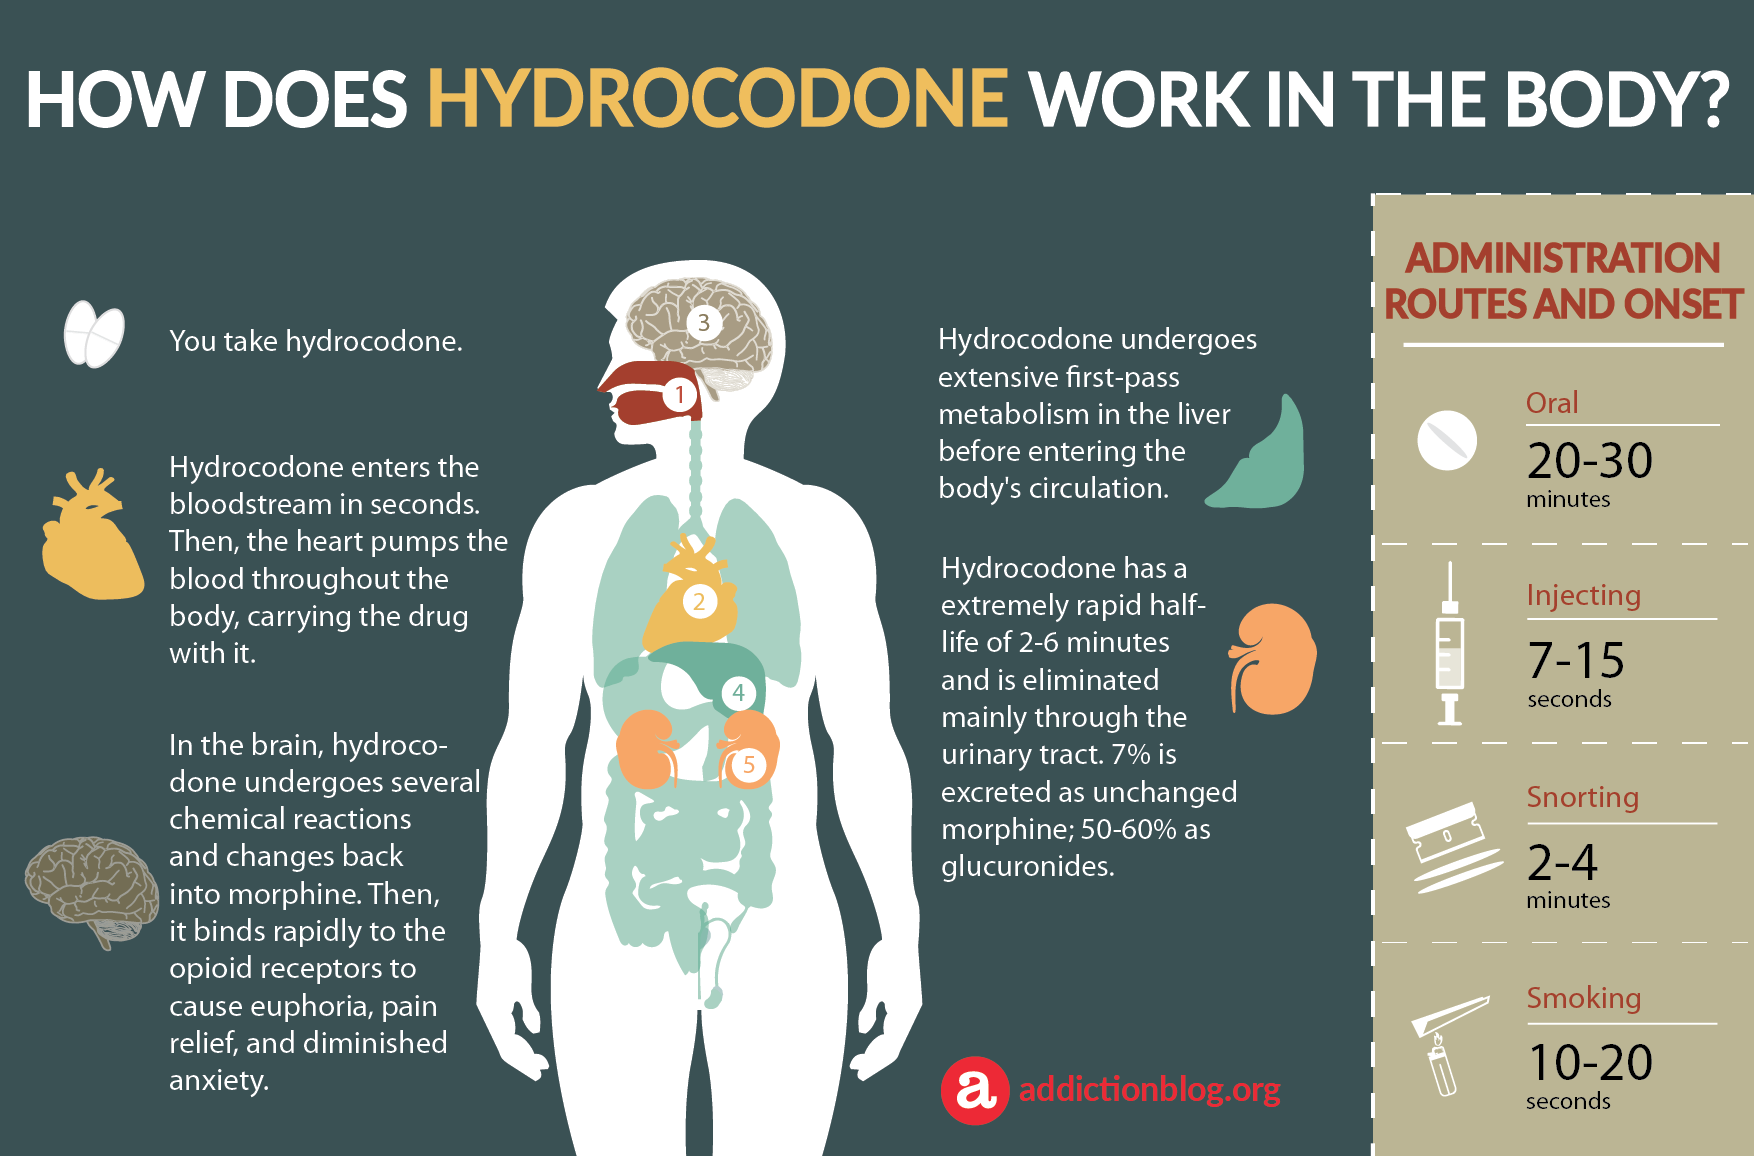 How Does Hydrocodone Work in the Body (INFOGRAPHIC)